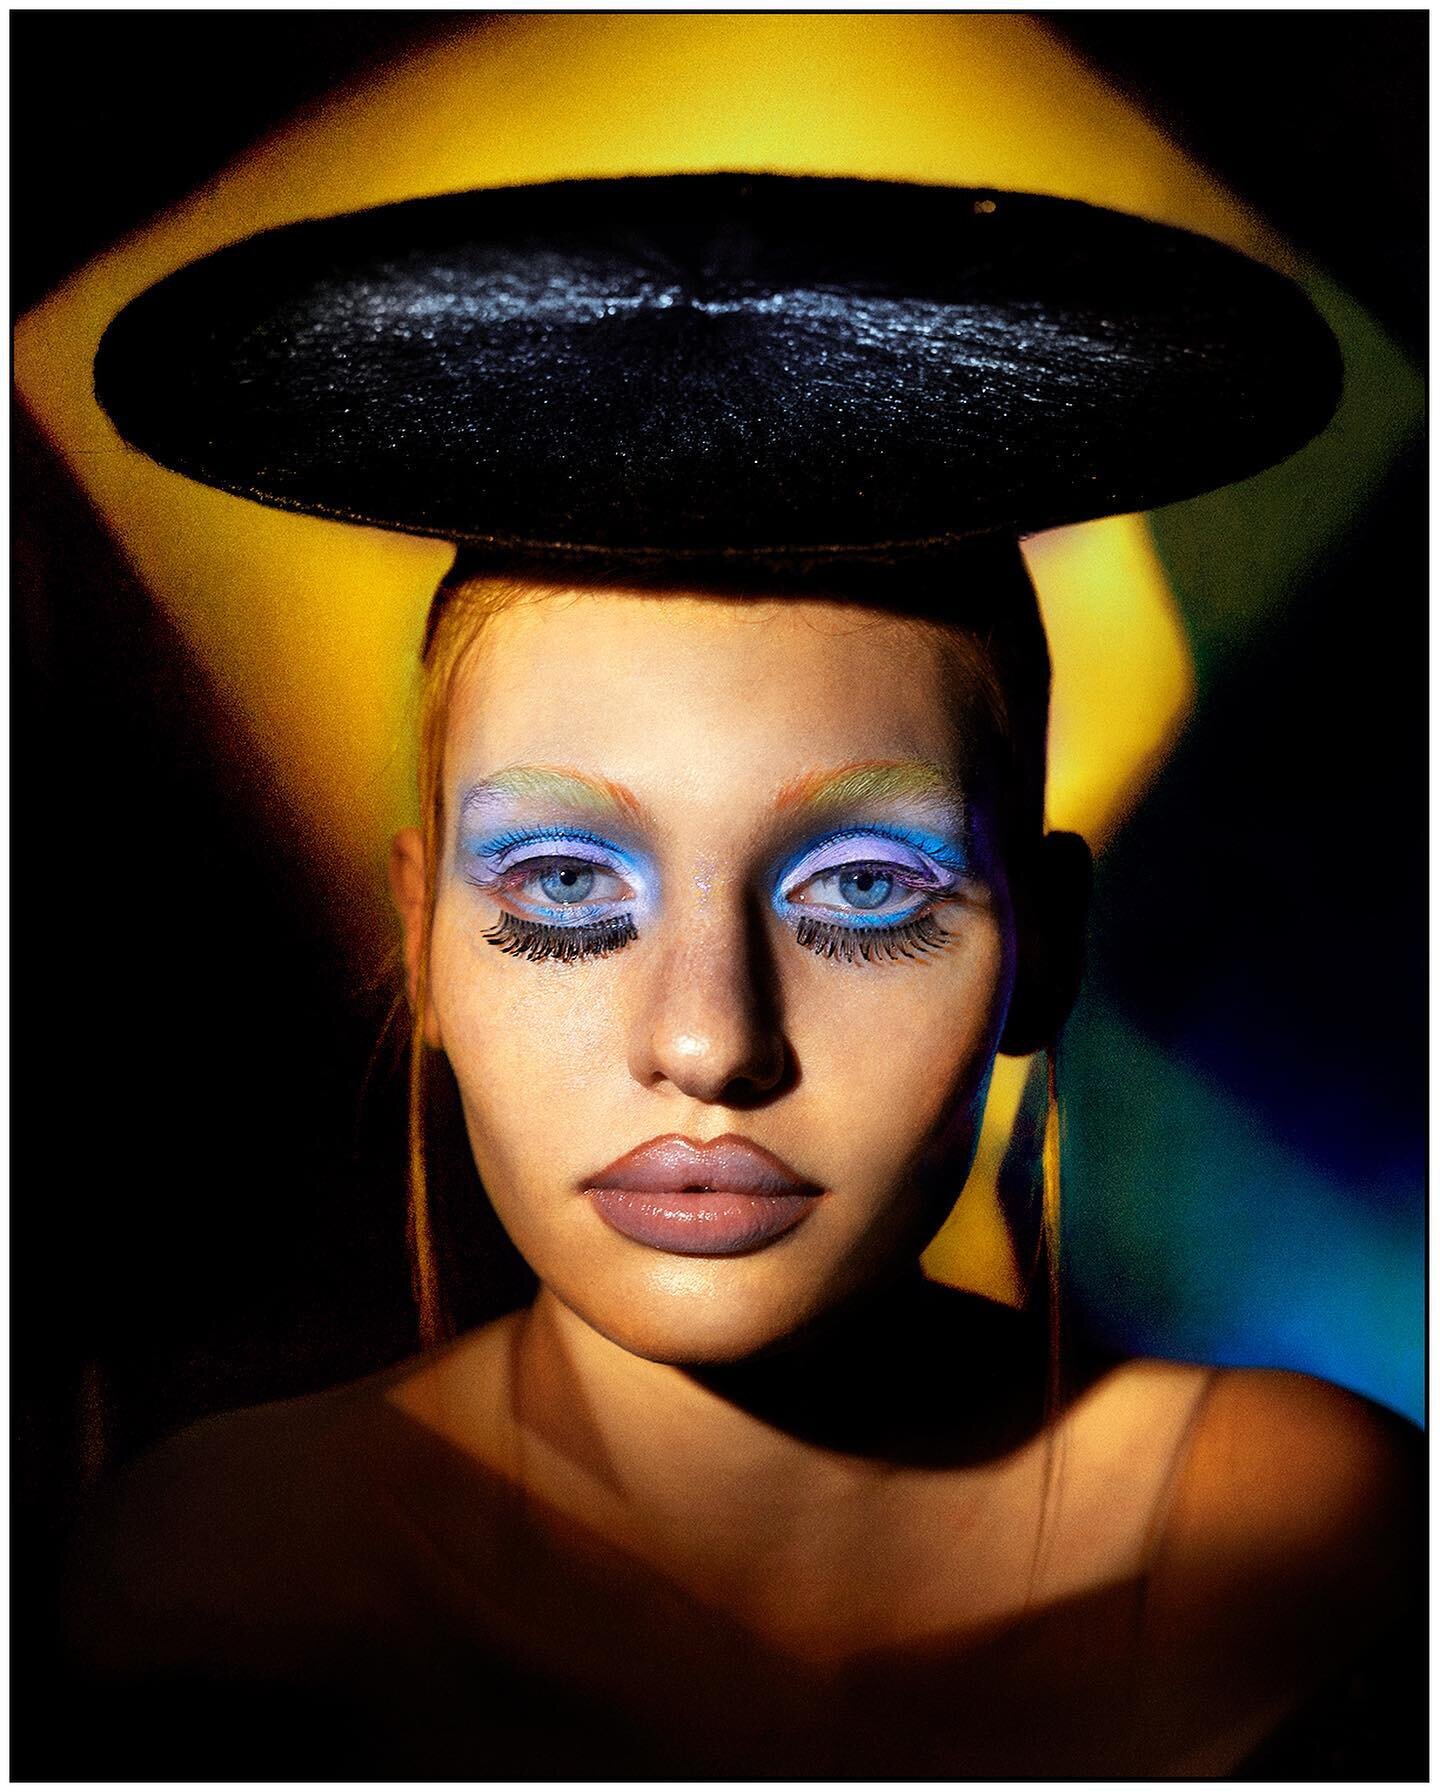 Star Sapphire&rsquo; for @schonmagazine out now! New work 2023. 

Really enjoyed creating this beauty/ fashion story in the berlin studio. This is the fourth look we shot :) 
Thank you to the amazing team: 

Photographer &amp; Art director: @bassam_a